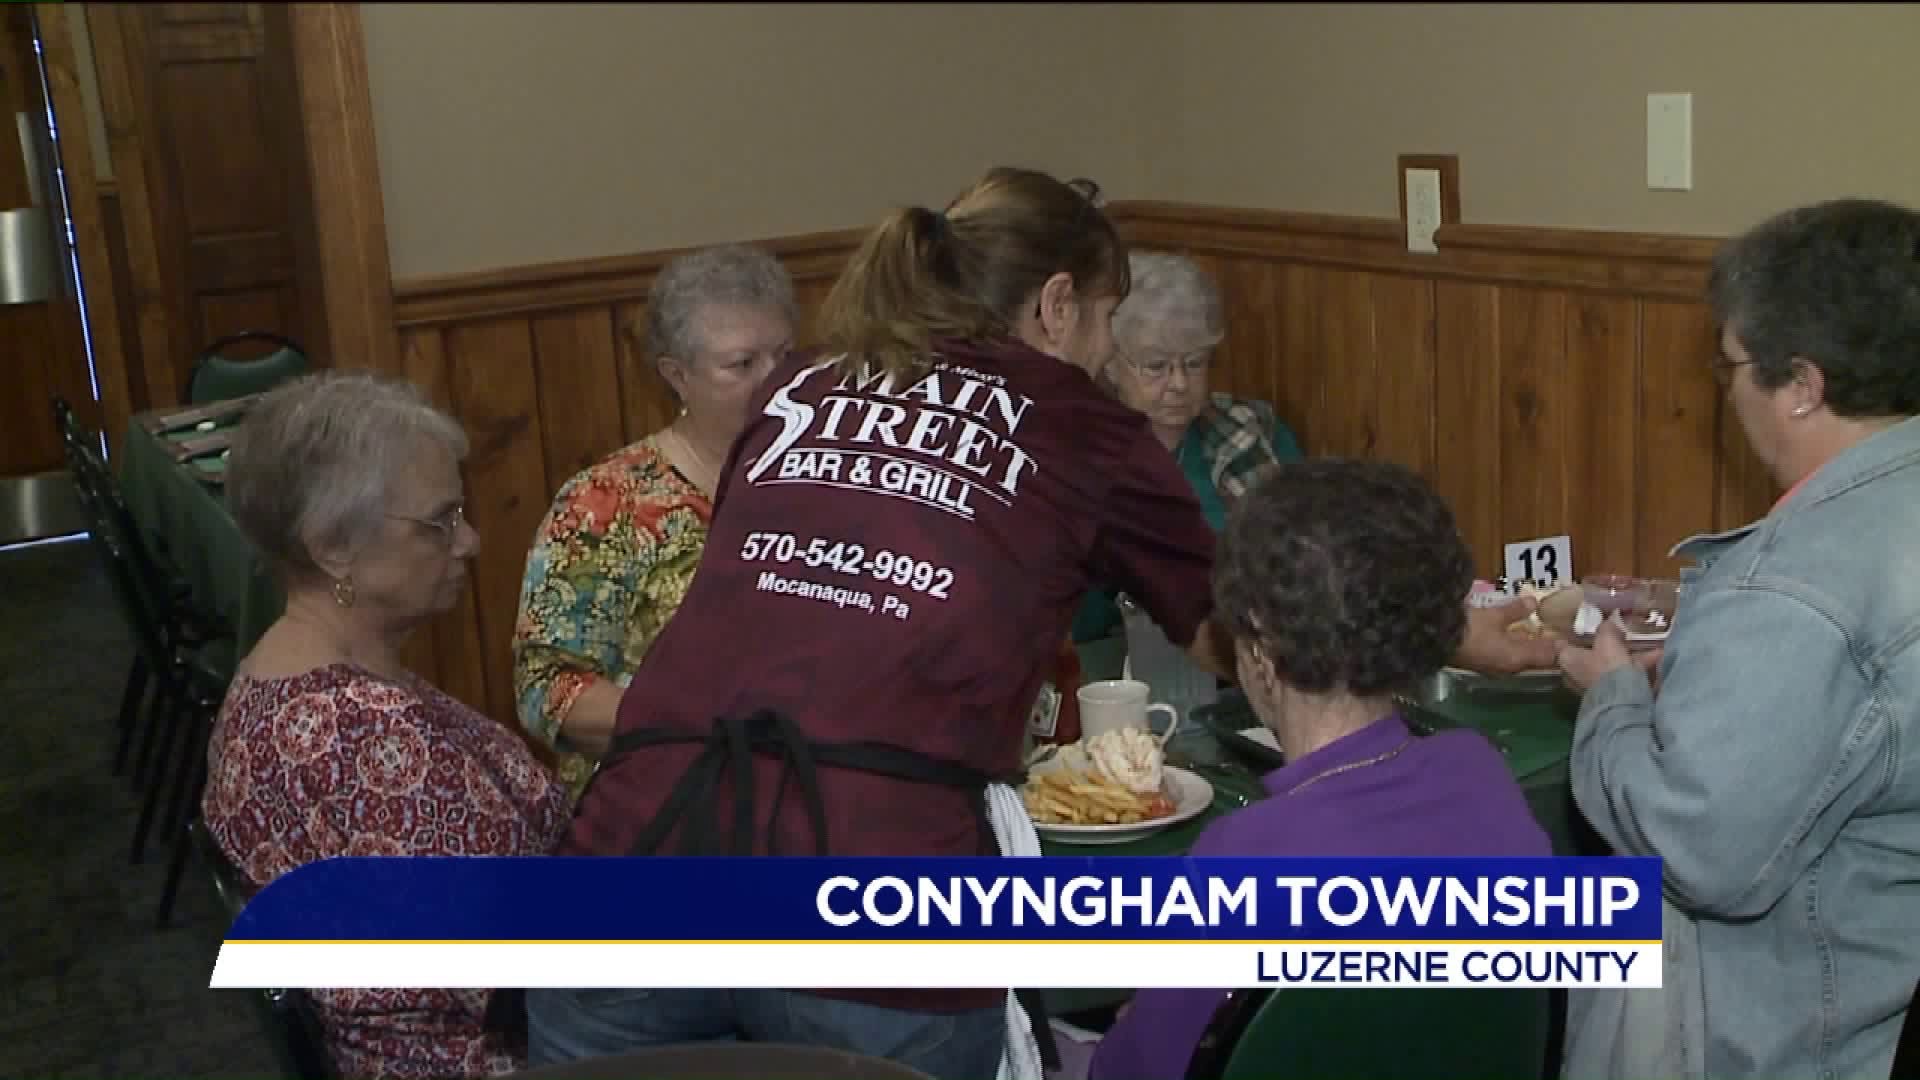 Restaurant in Luzerne County Makes a Comeback After Fire